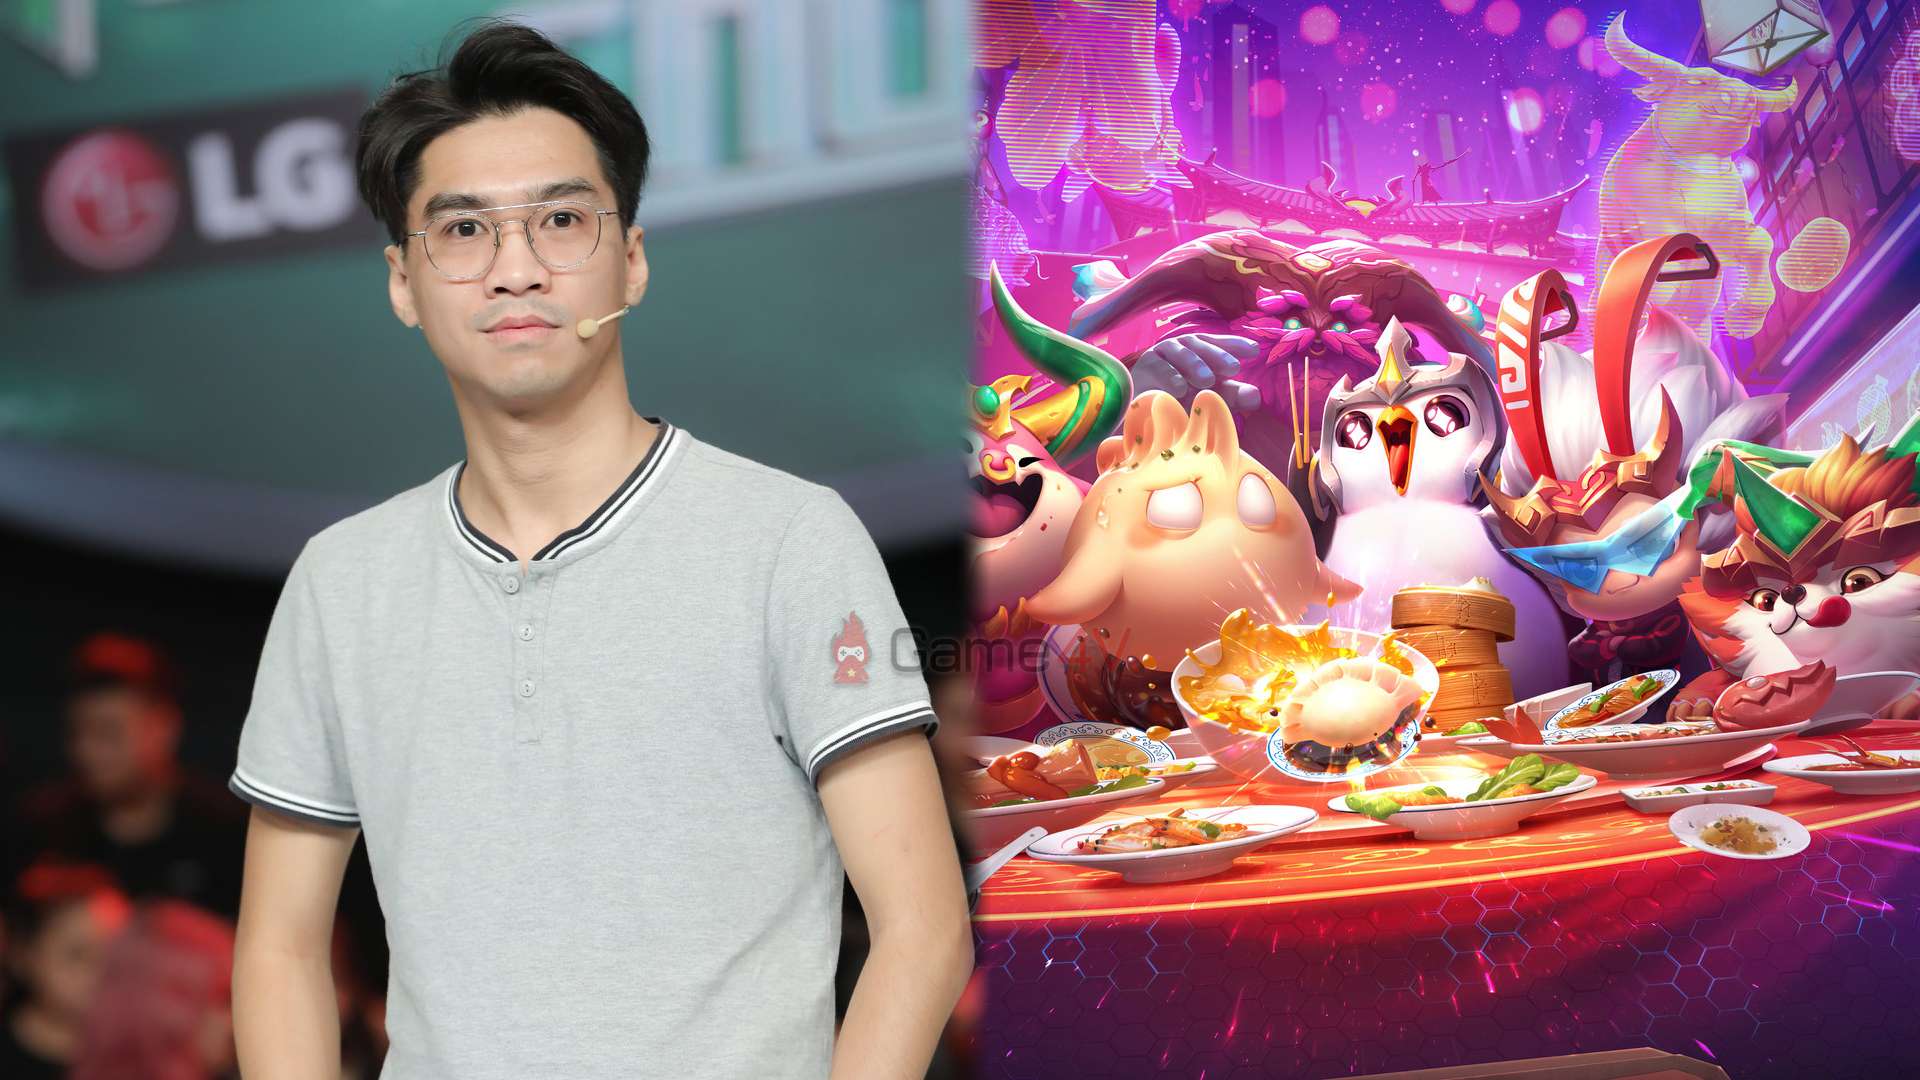 PewPew became a guest player in the Vietnam region to attend the TFT tournament